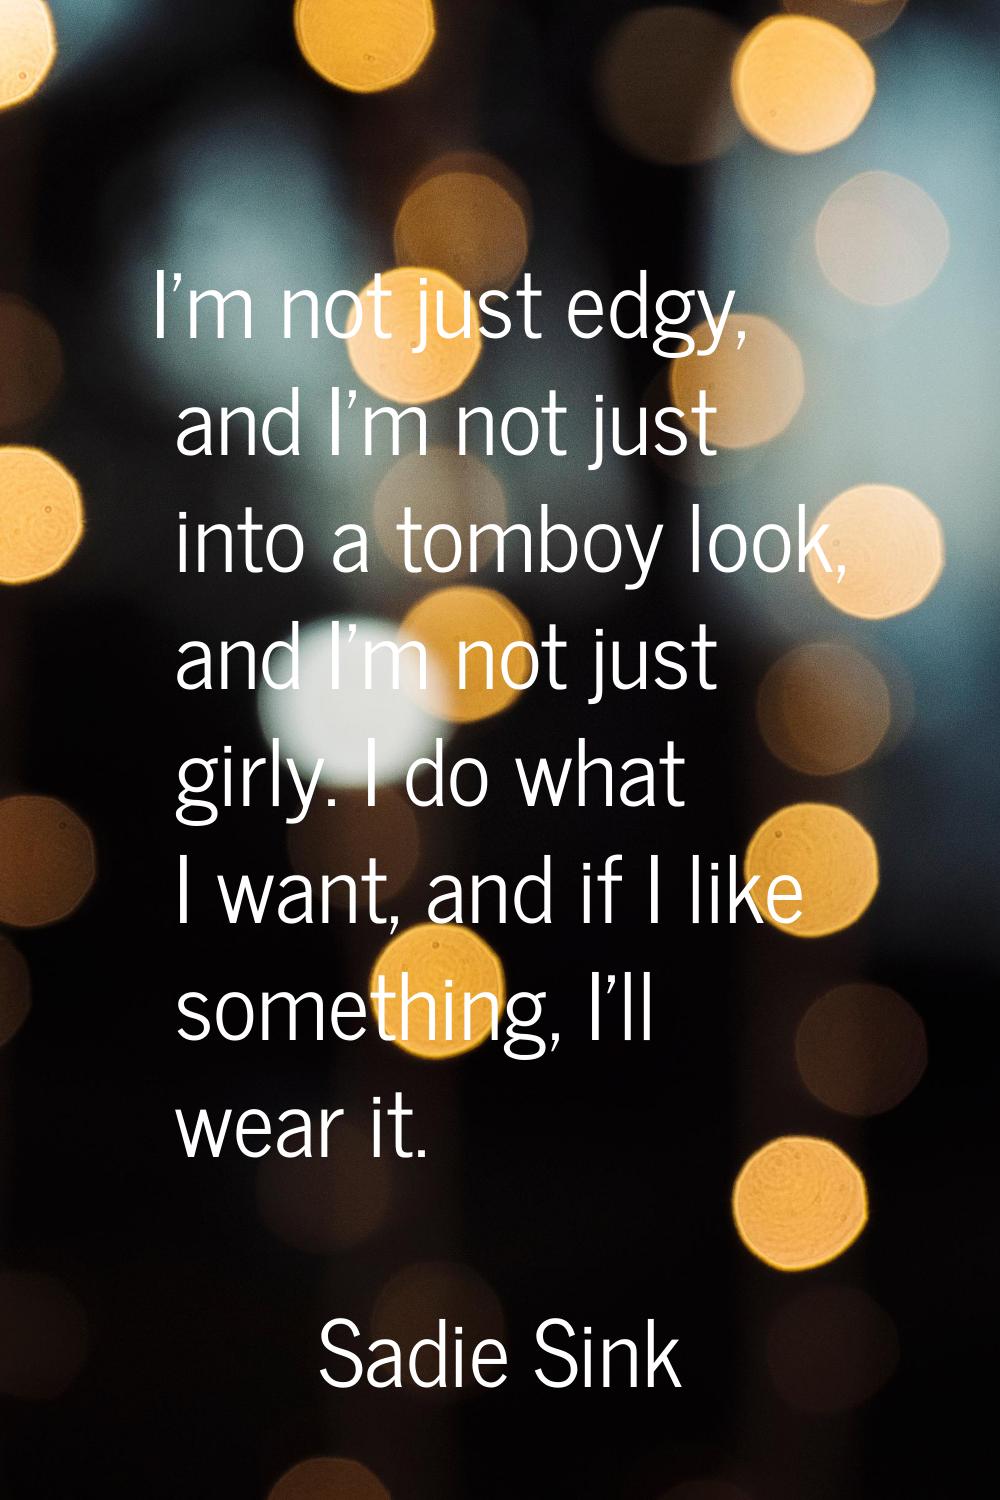 I'm not just edgy, and I'm not just into a tomboy look, and I'm not just girly. I do what I want, a